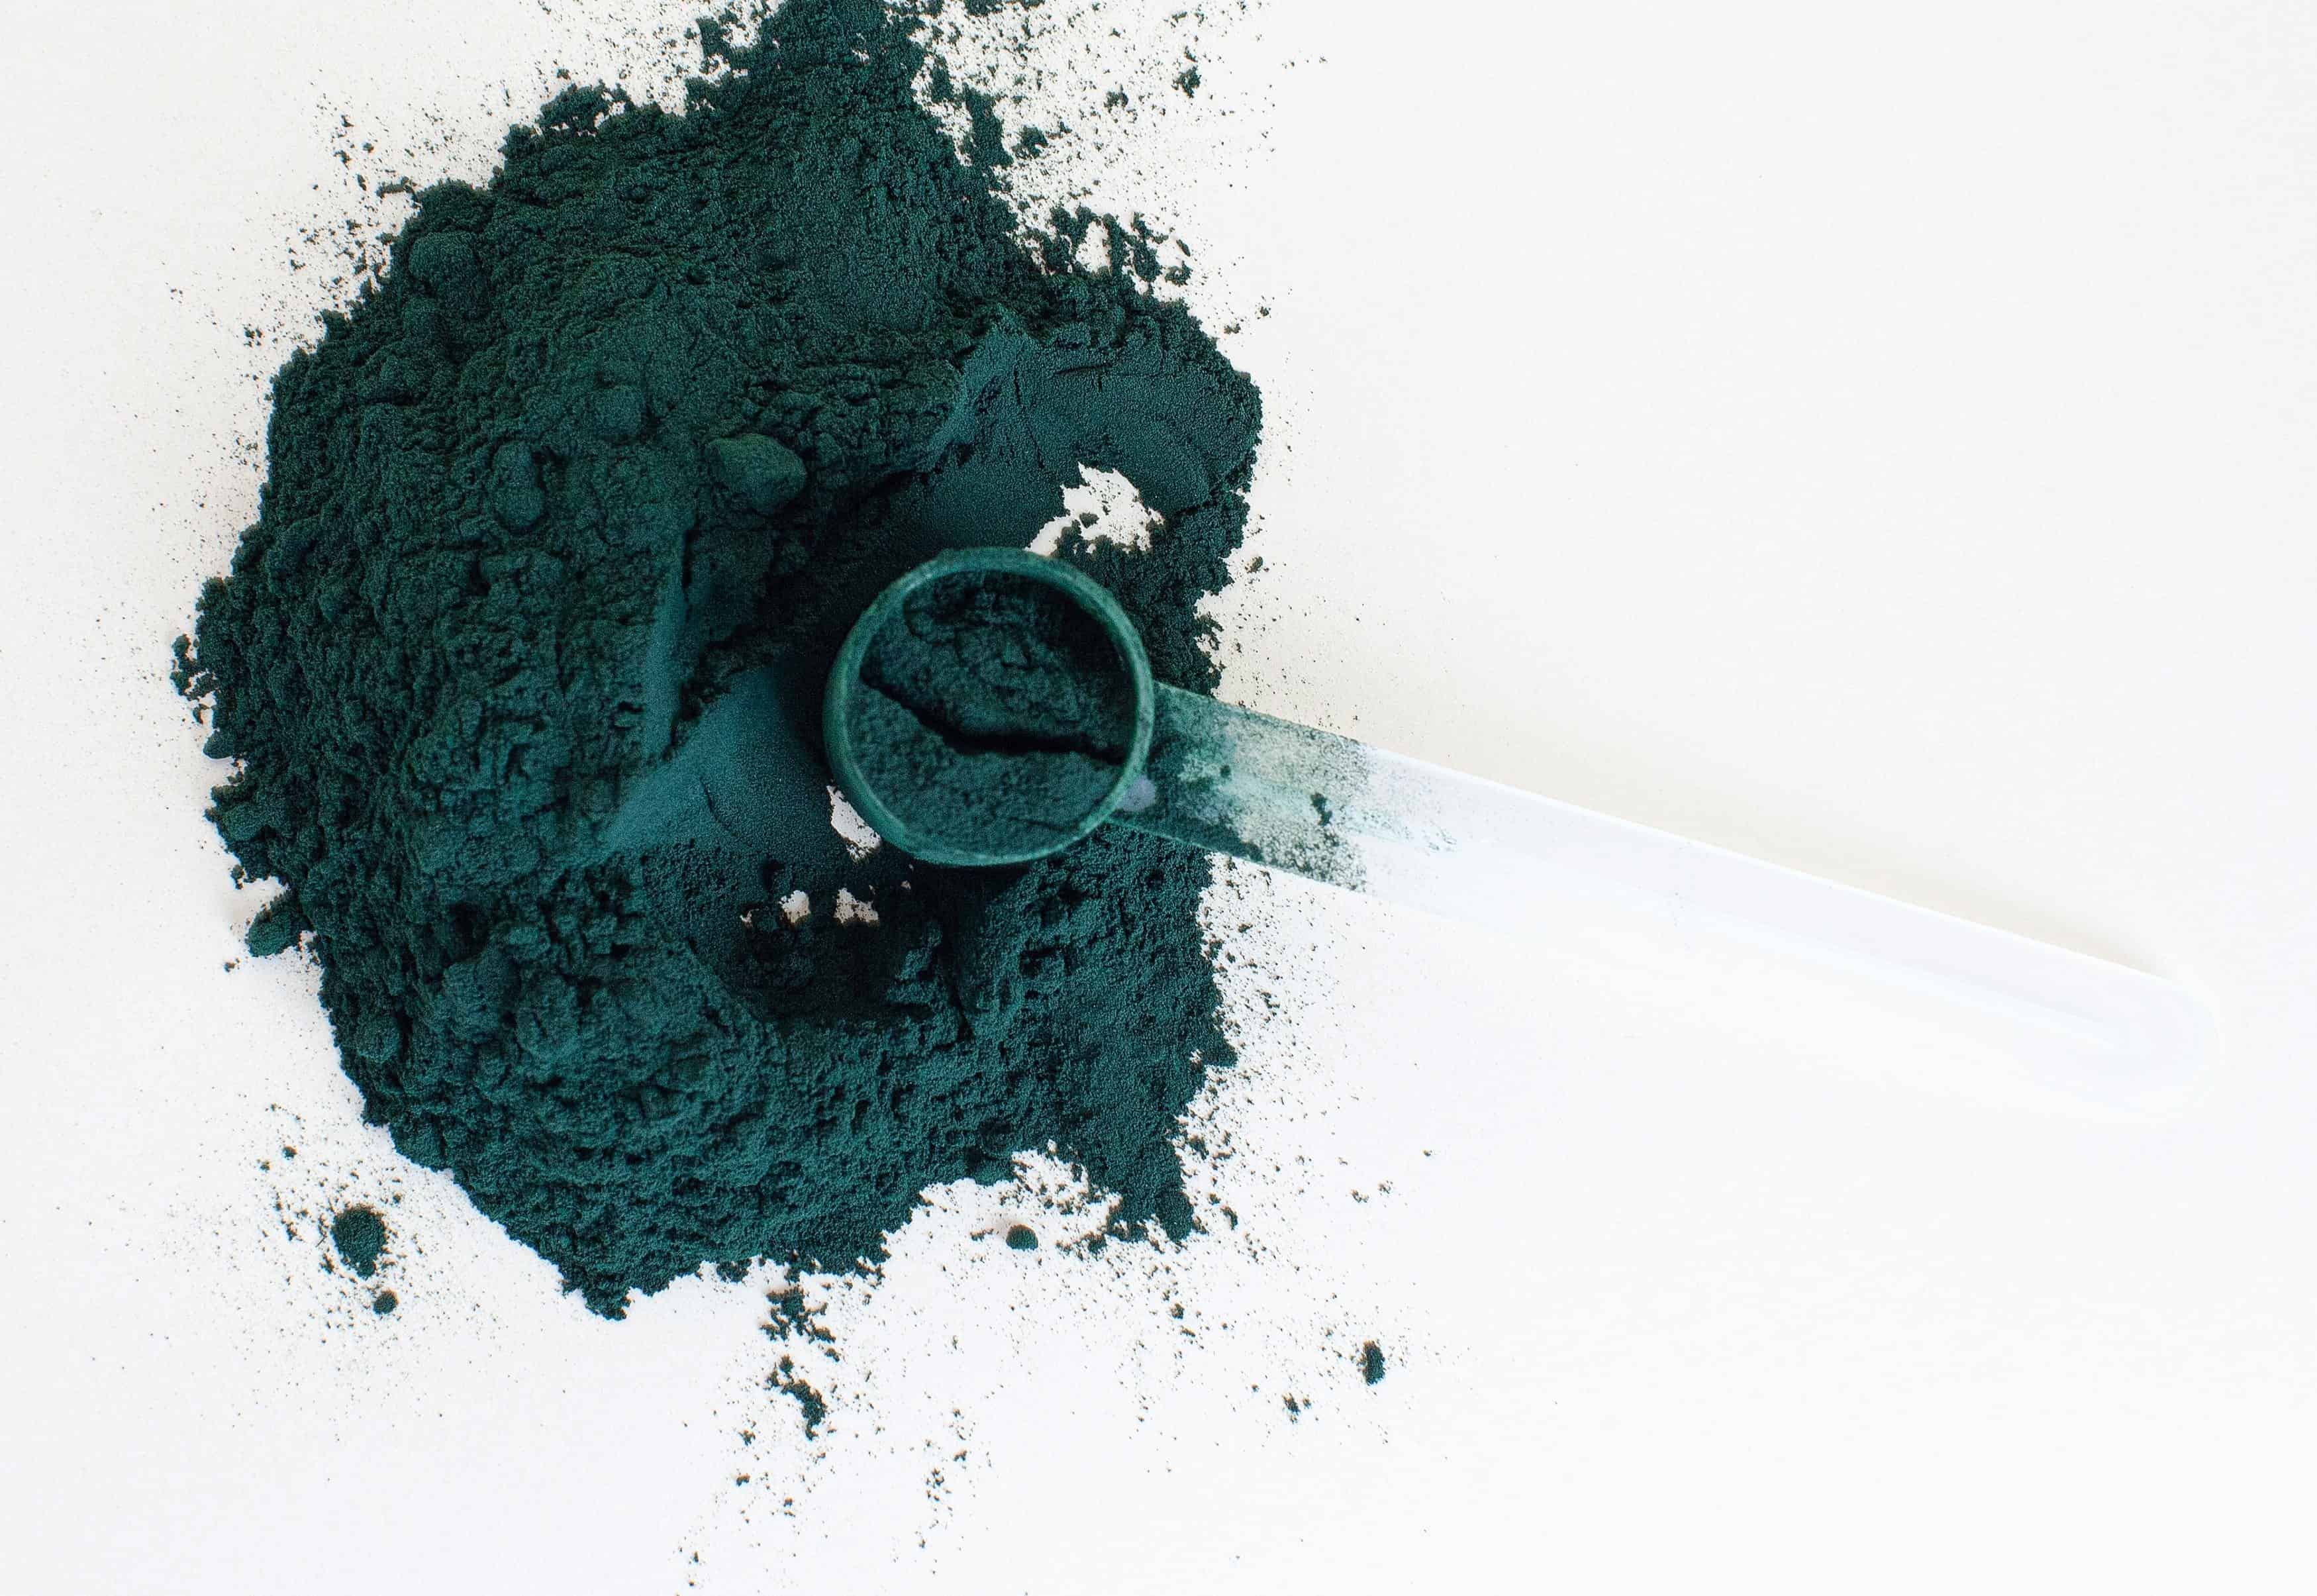 Protein-rich "Spirulina" might help Northern Europe overcome food insecurity